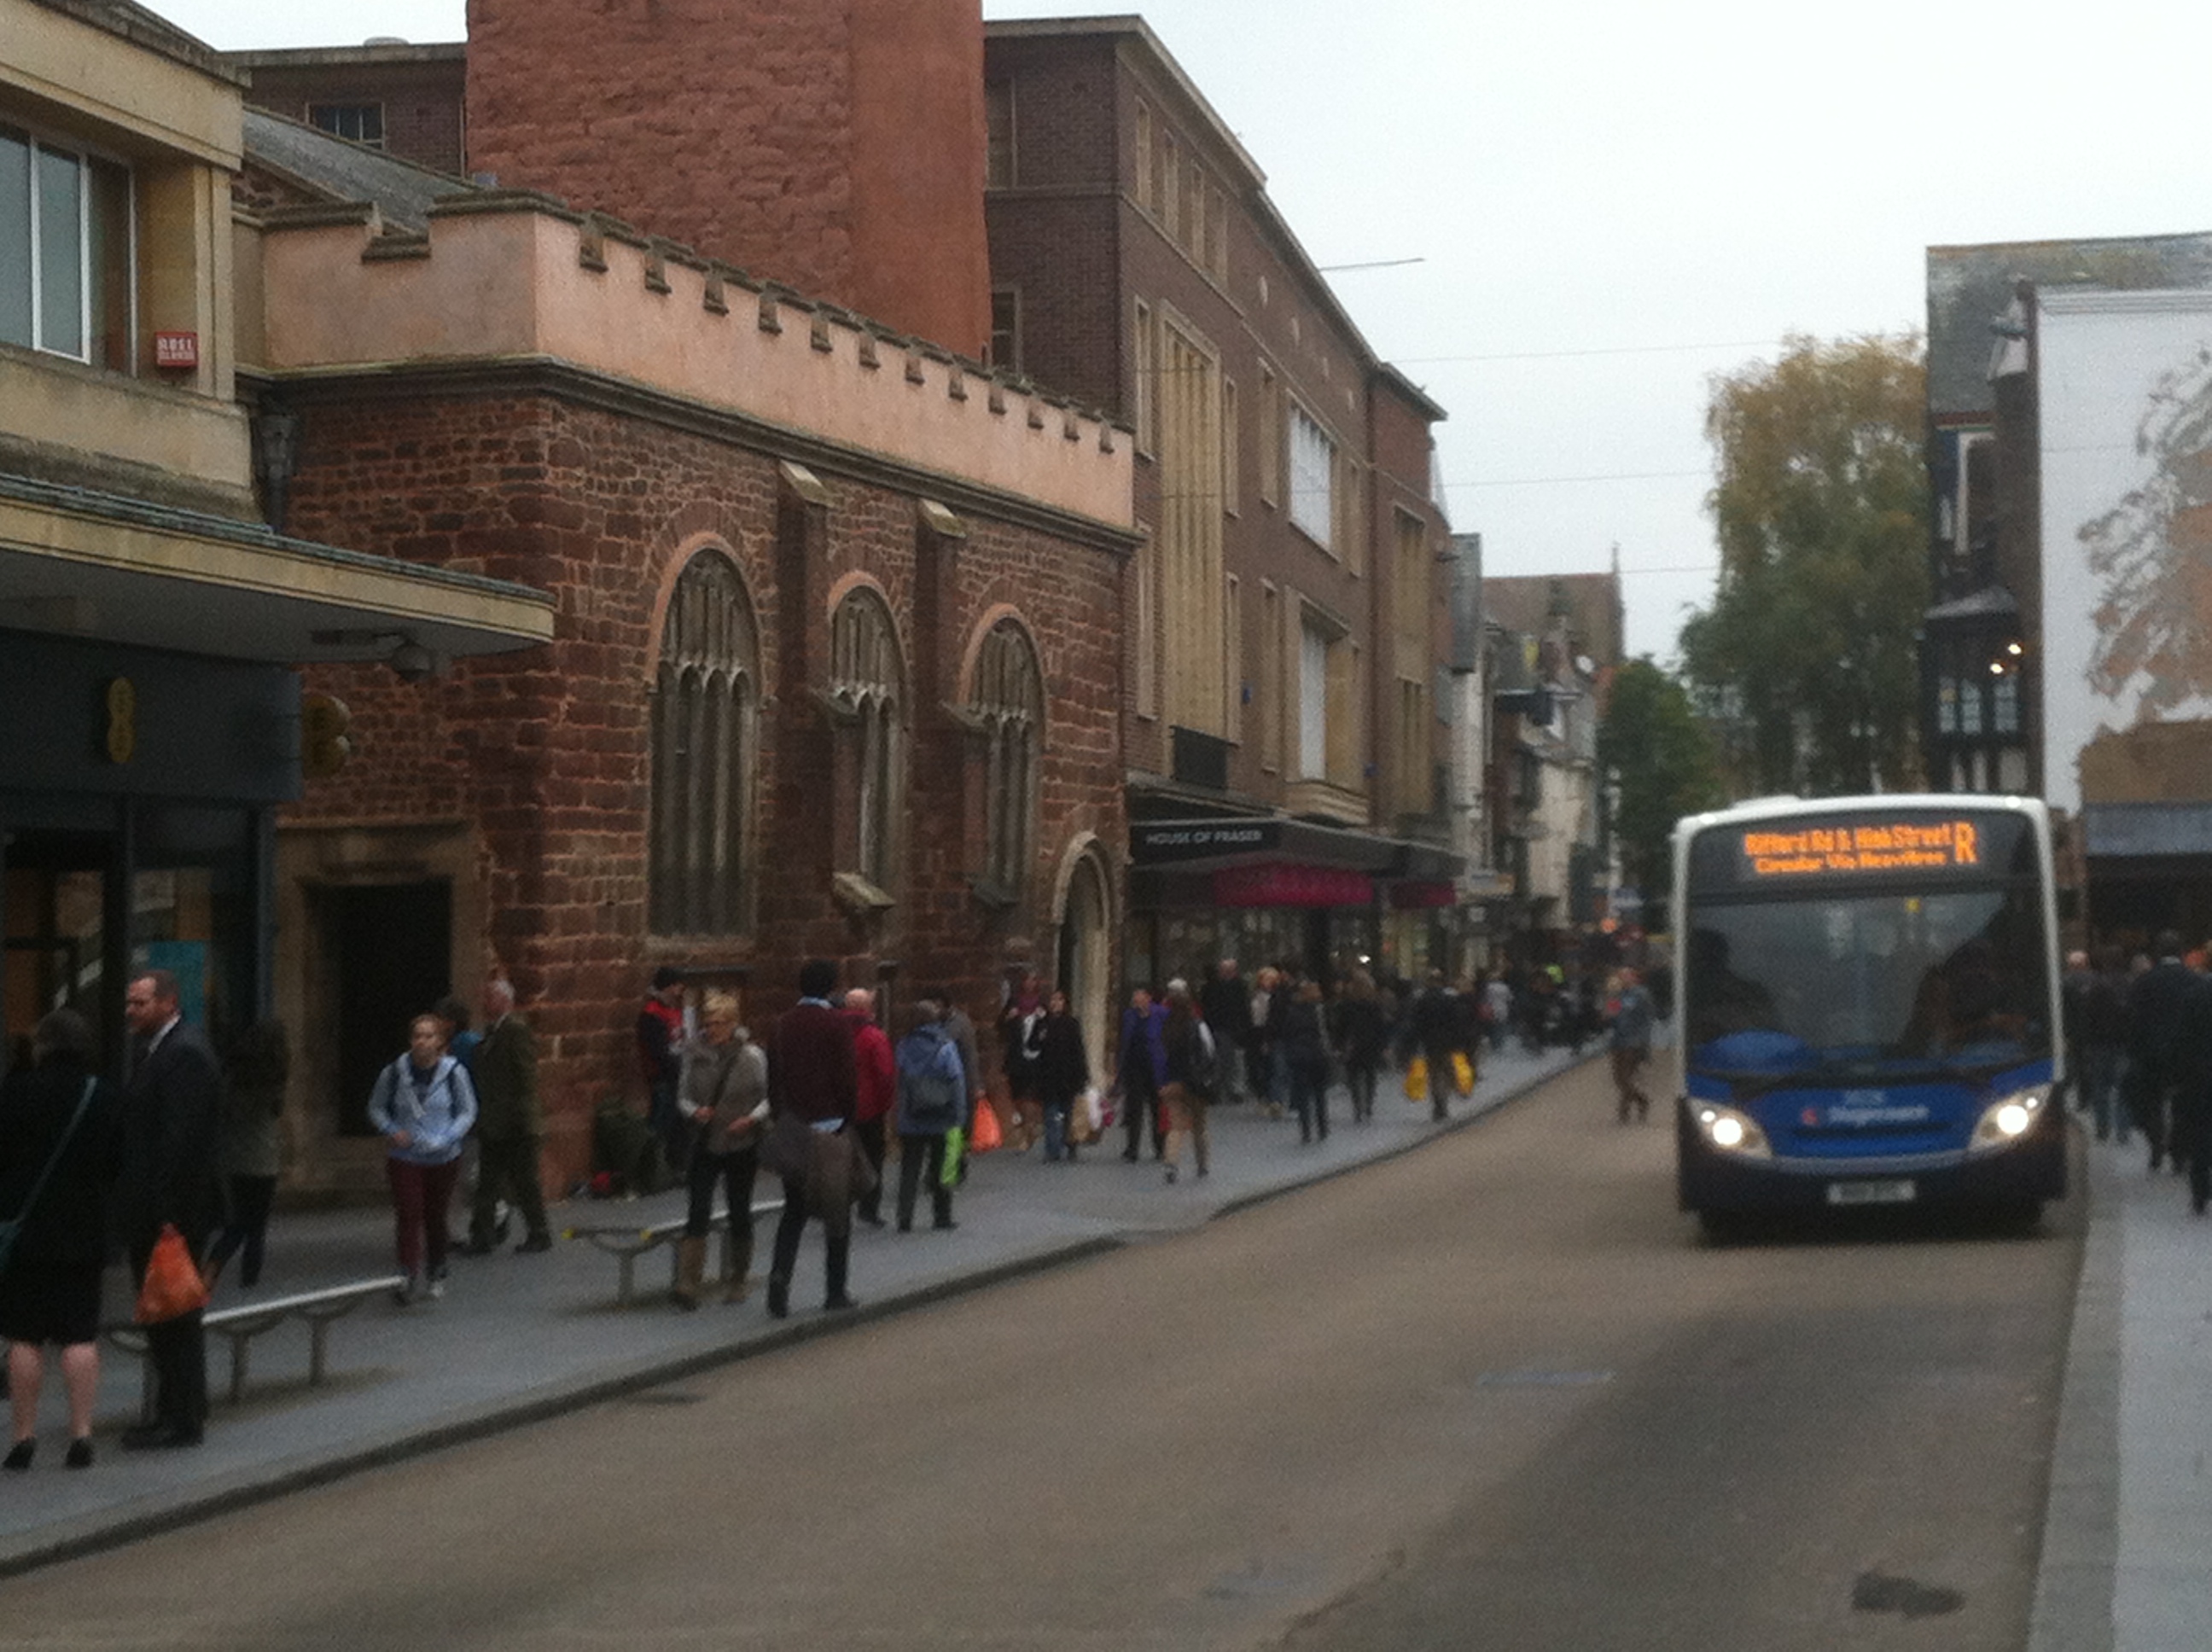 Stagecoach diversions in place due to Exeter High Street closure | The